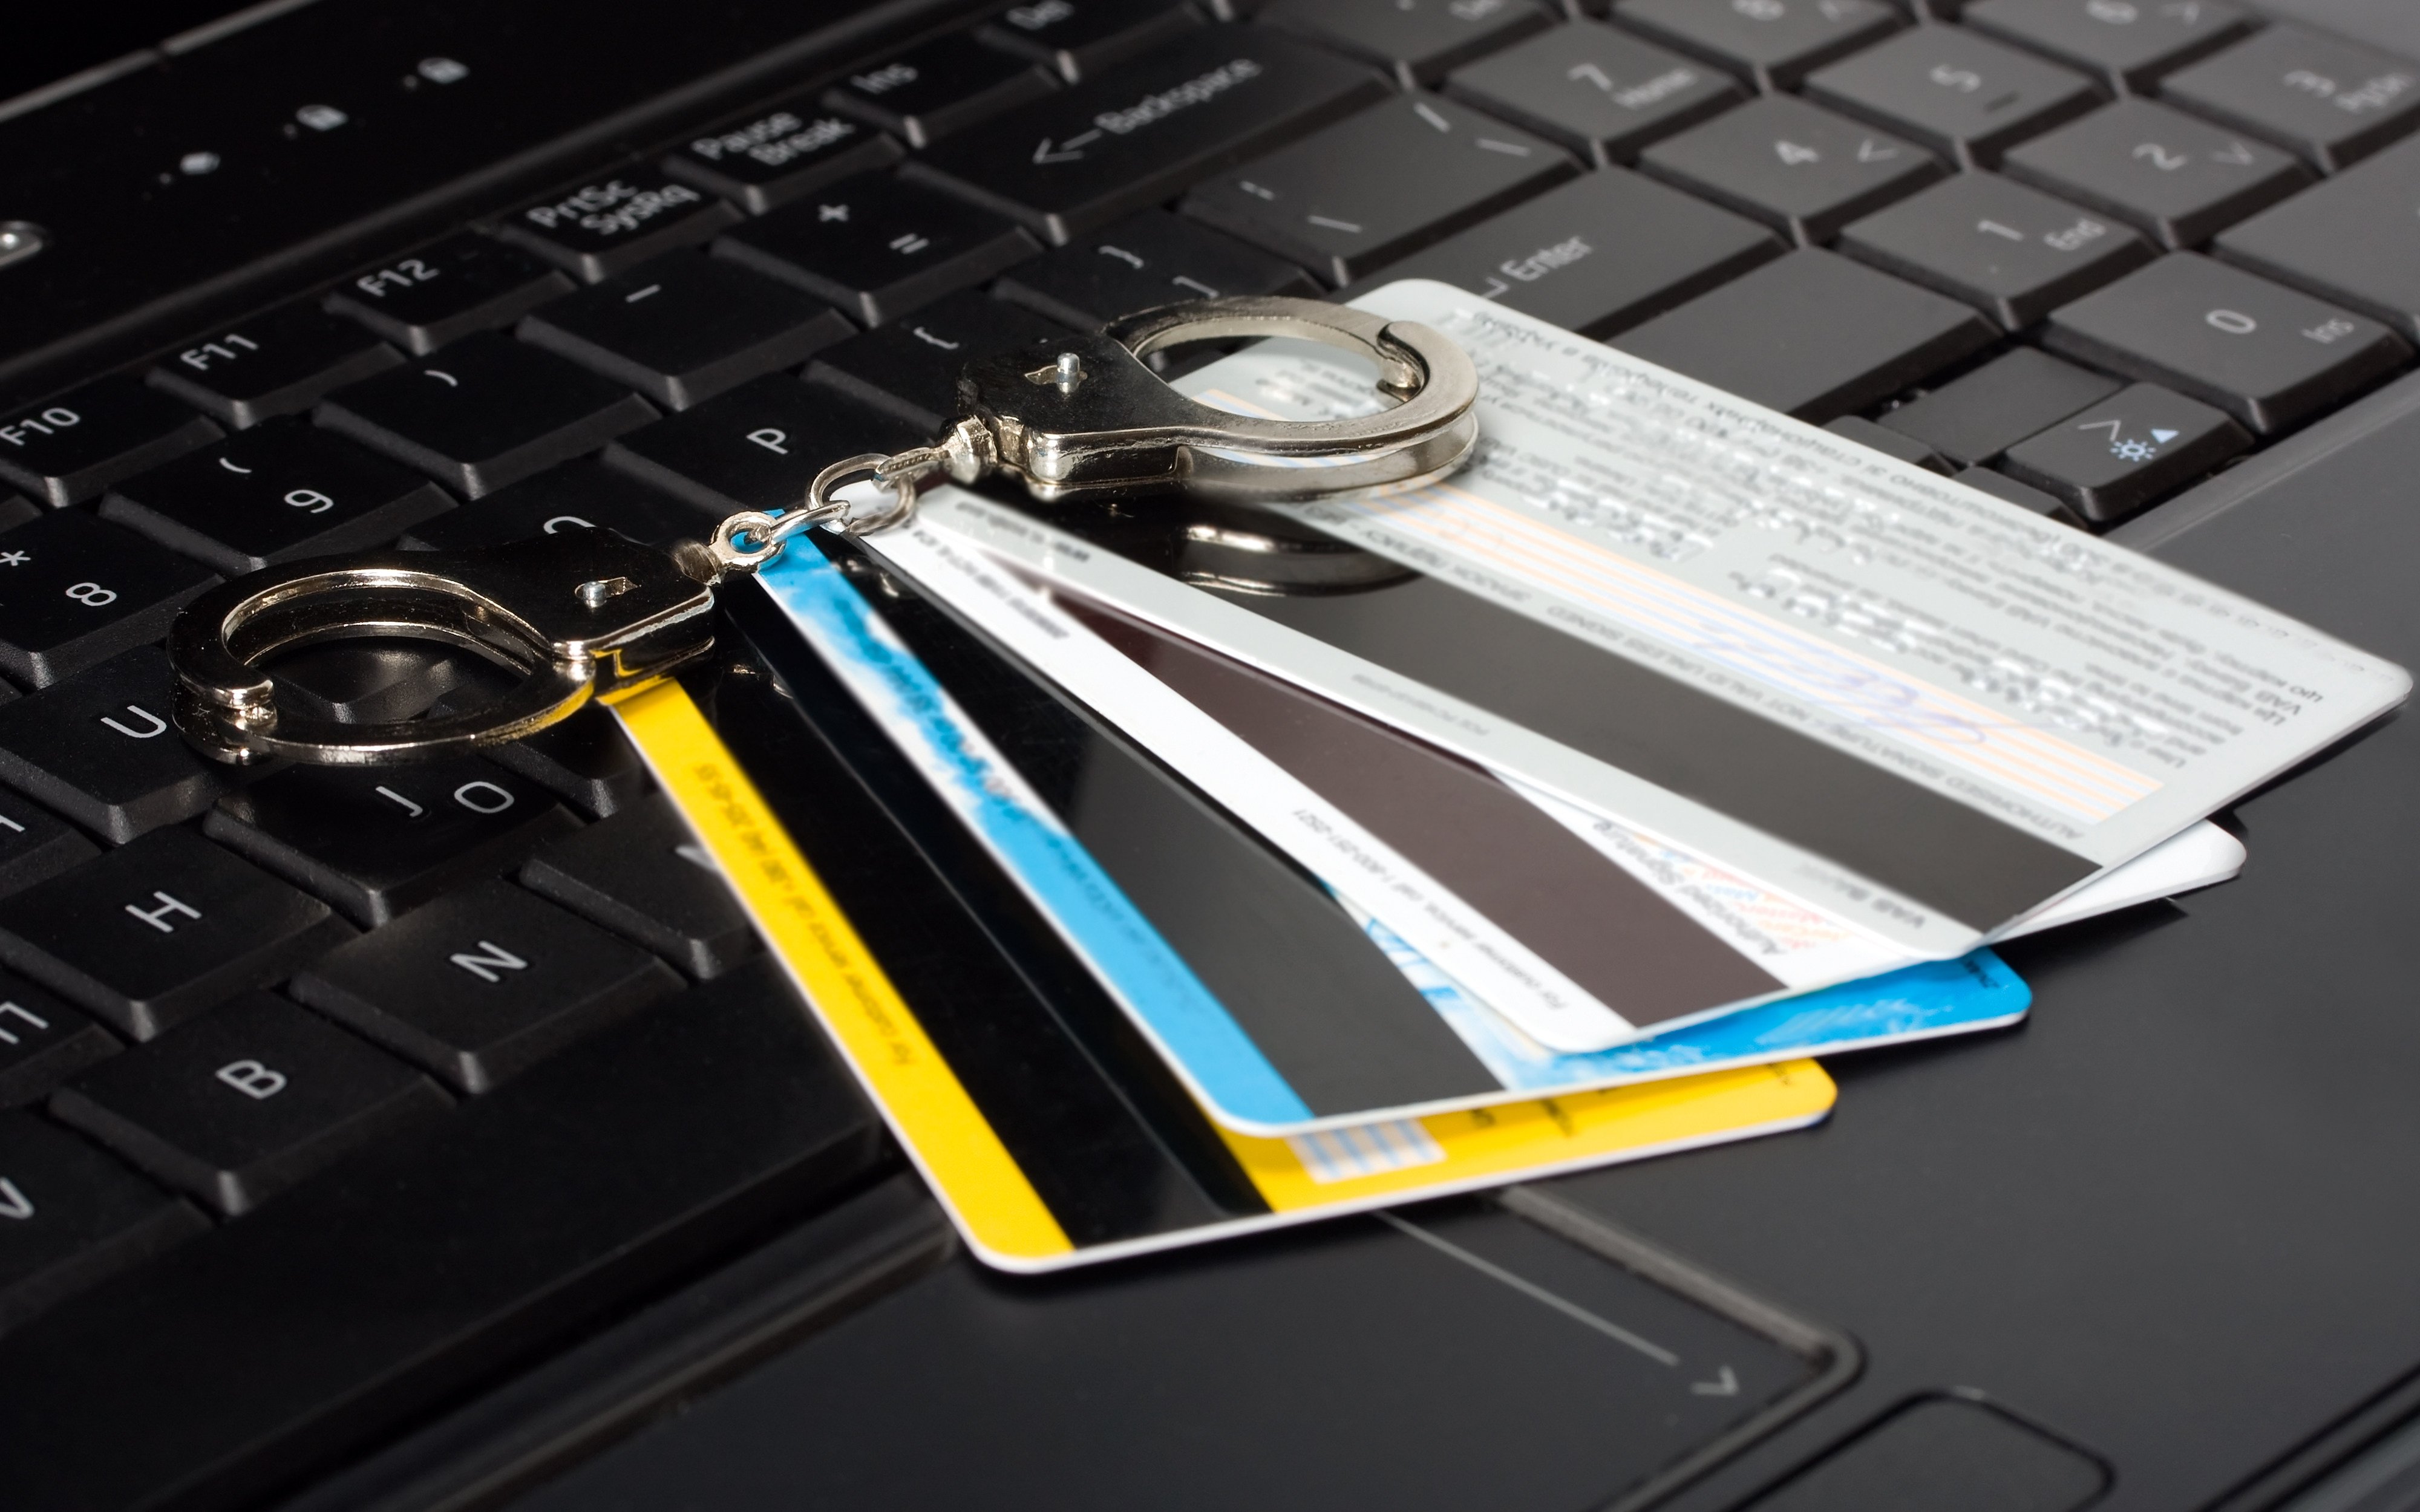 Police have received a total of 159 related reports of suspected credit card fraud. Photo: Shutterstock Images